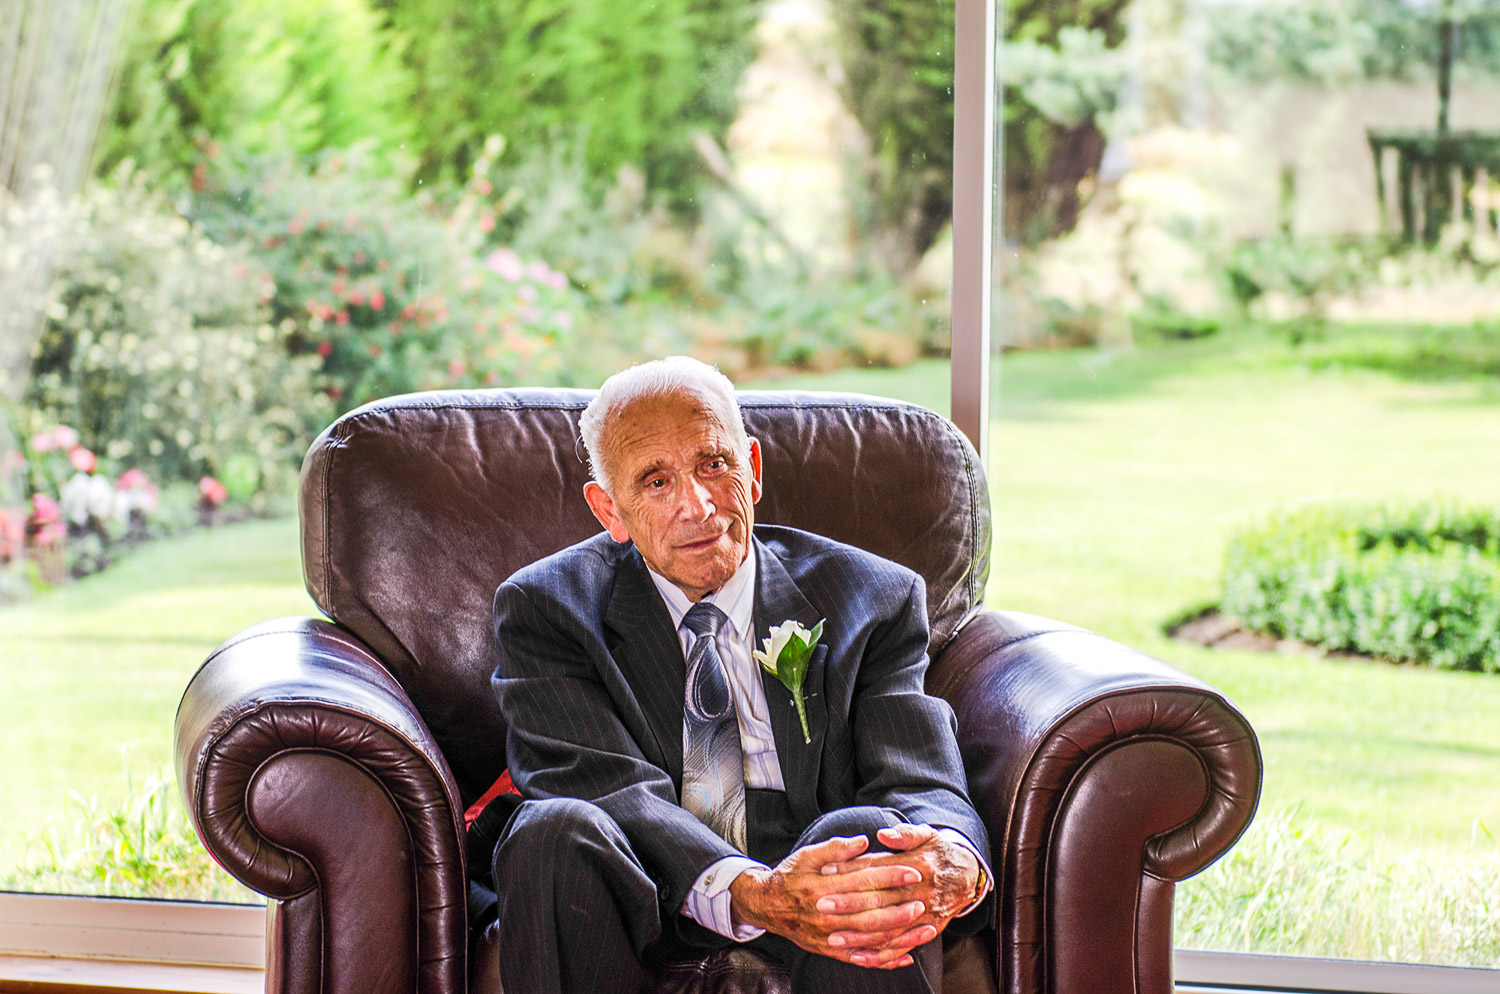 grandfather waiting for the bride